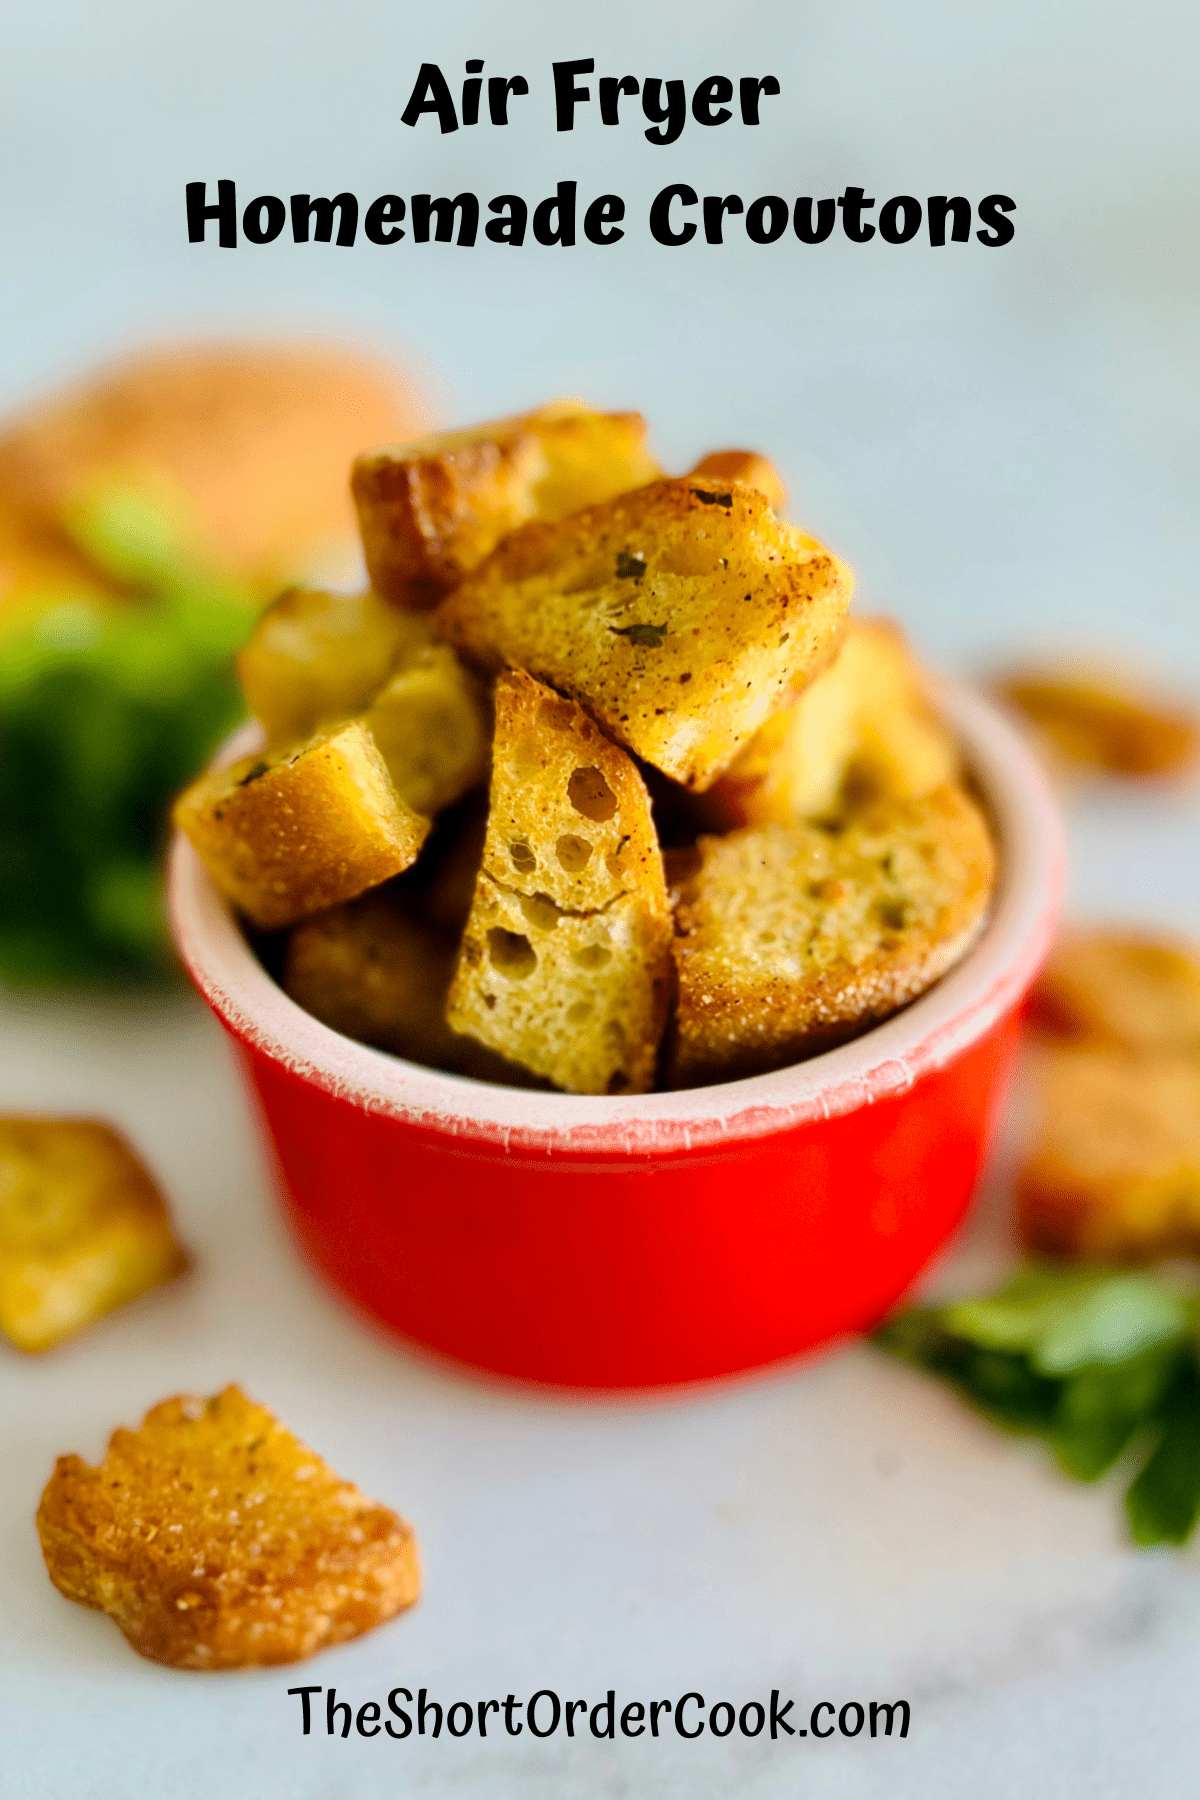 Crispy crunchy croutons that were cooked in the air fryer in a red bowl.